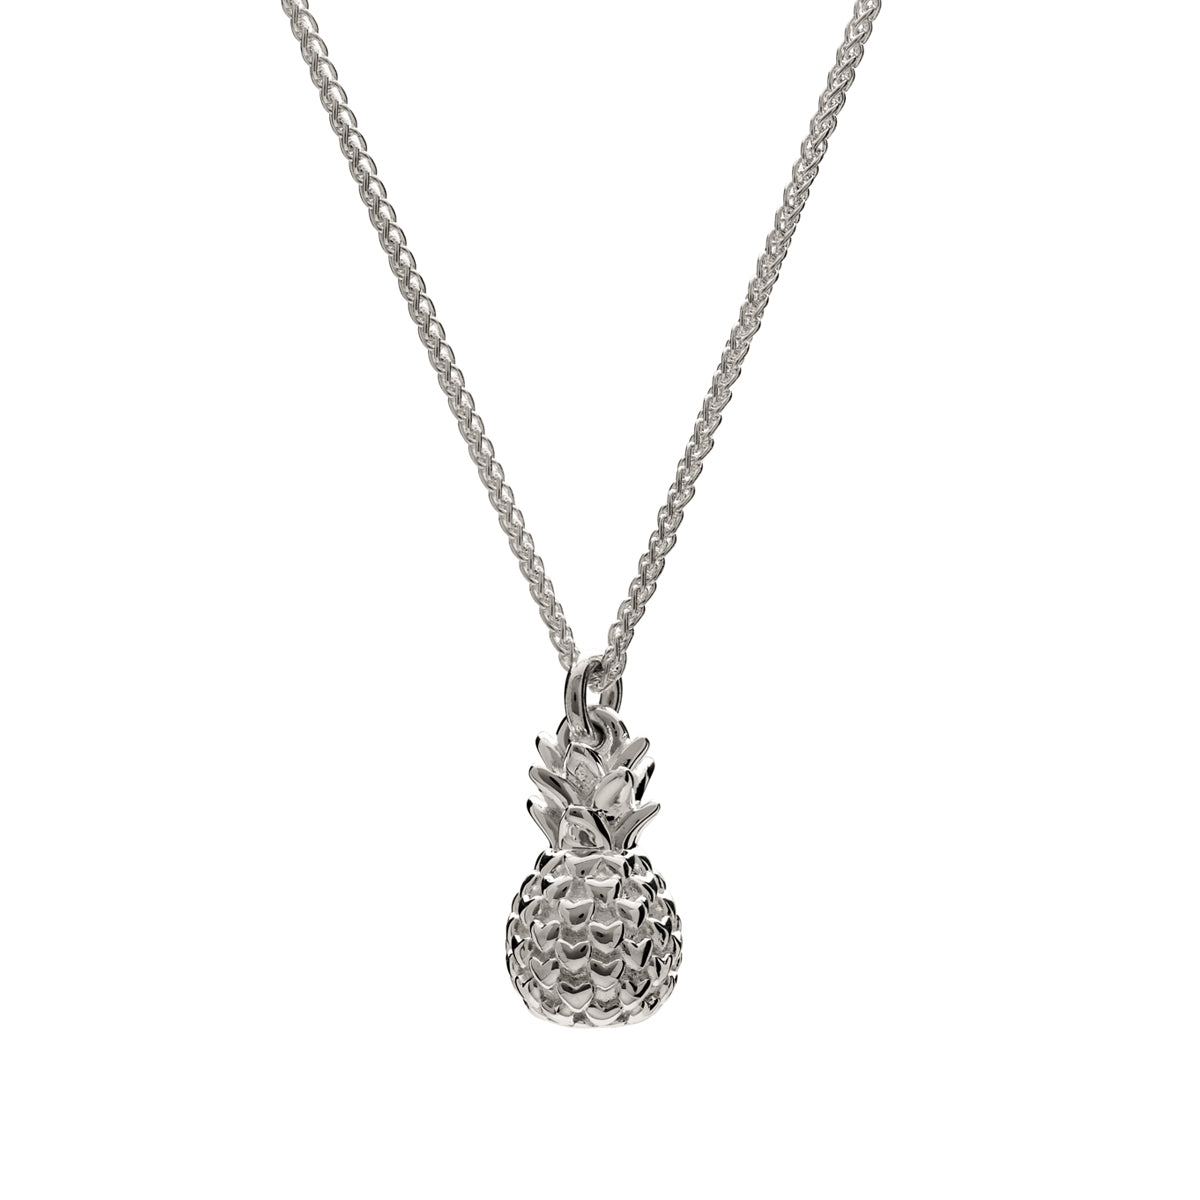 Chunky silver pineapple pendant necklace with heart spikes Scarlett Jewellery